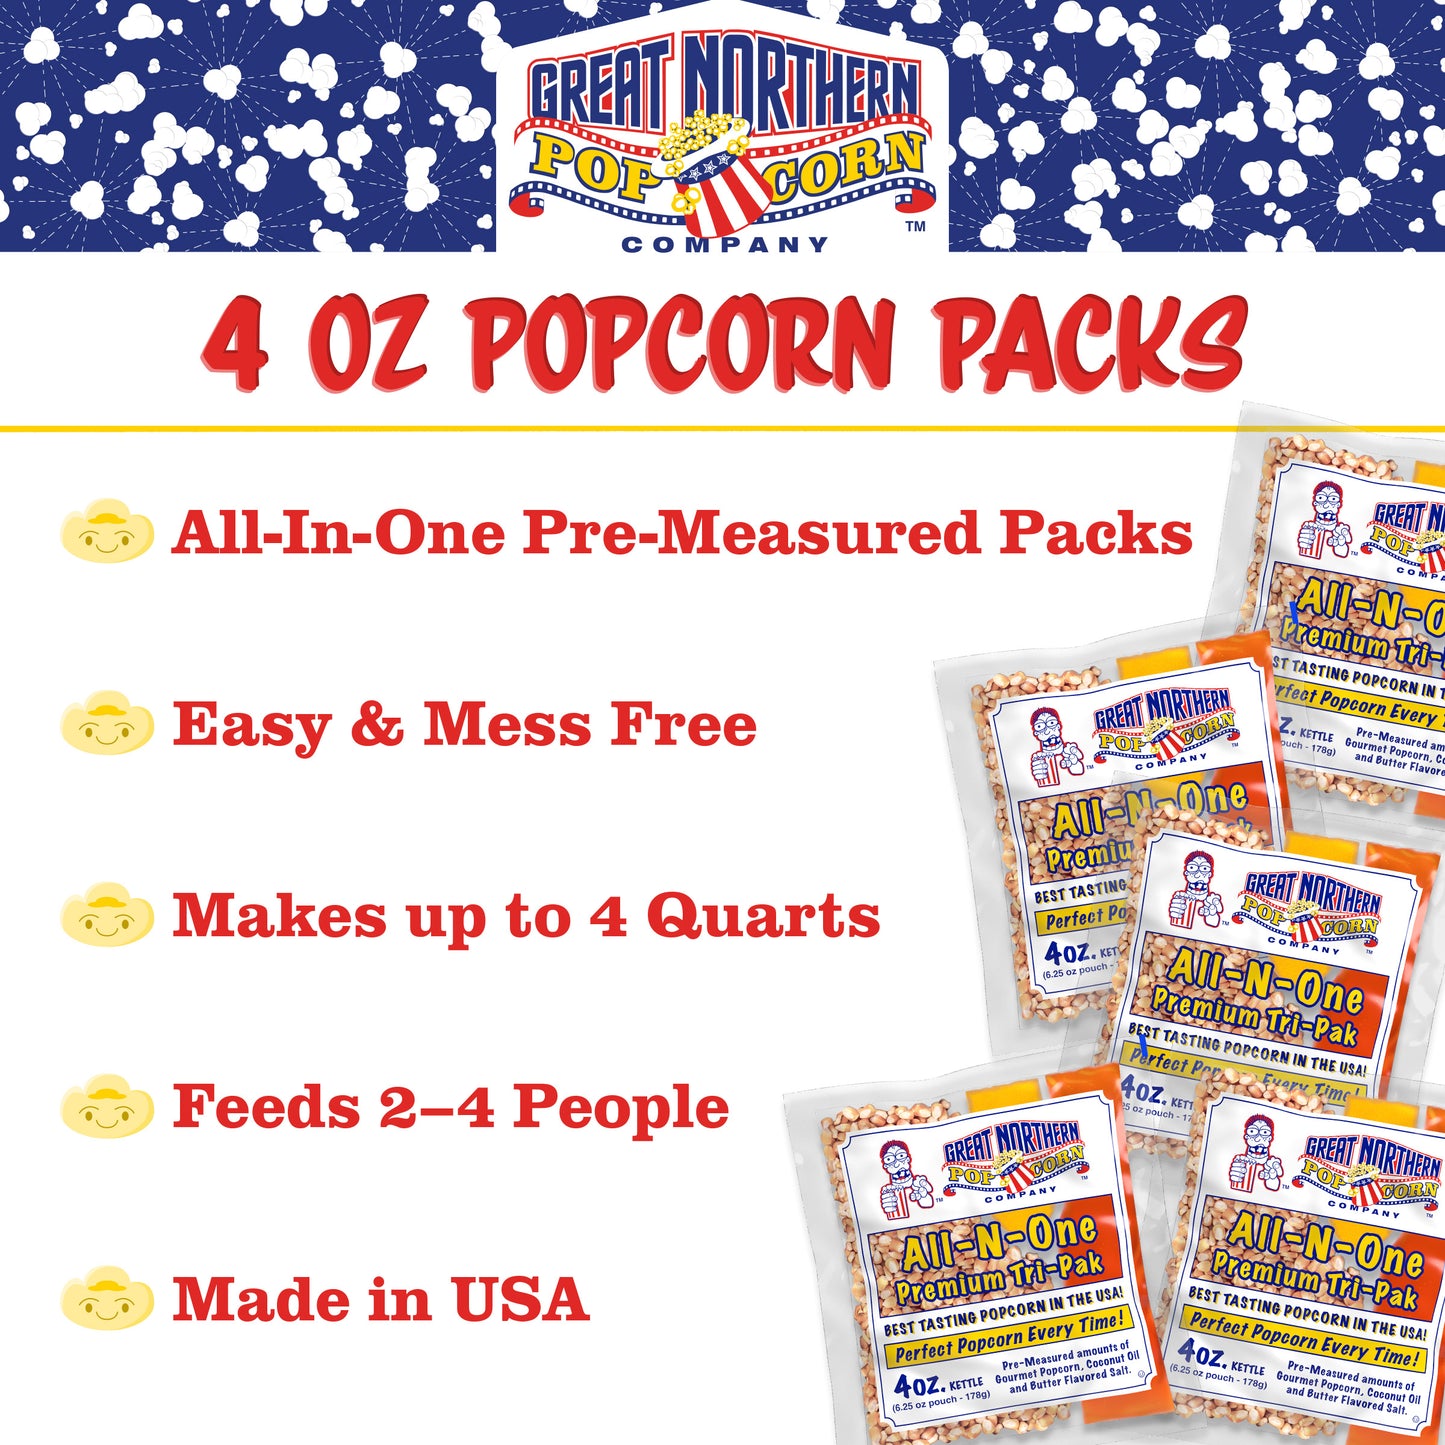 Big Bambino Popcorn Machine  with  4 Oz Kettle and 24 Pack of All-In-One Popcorn Kernel Packets - Blue